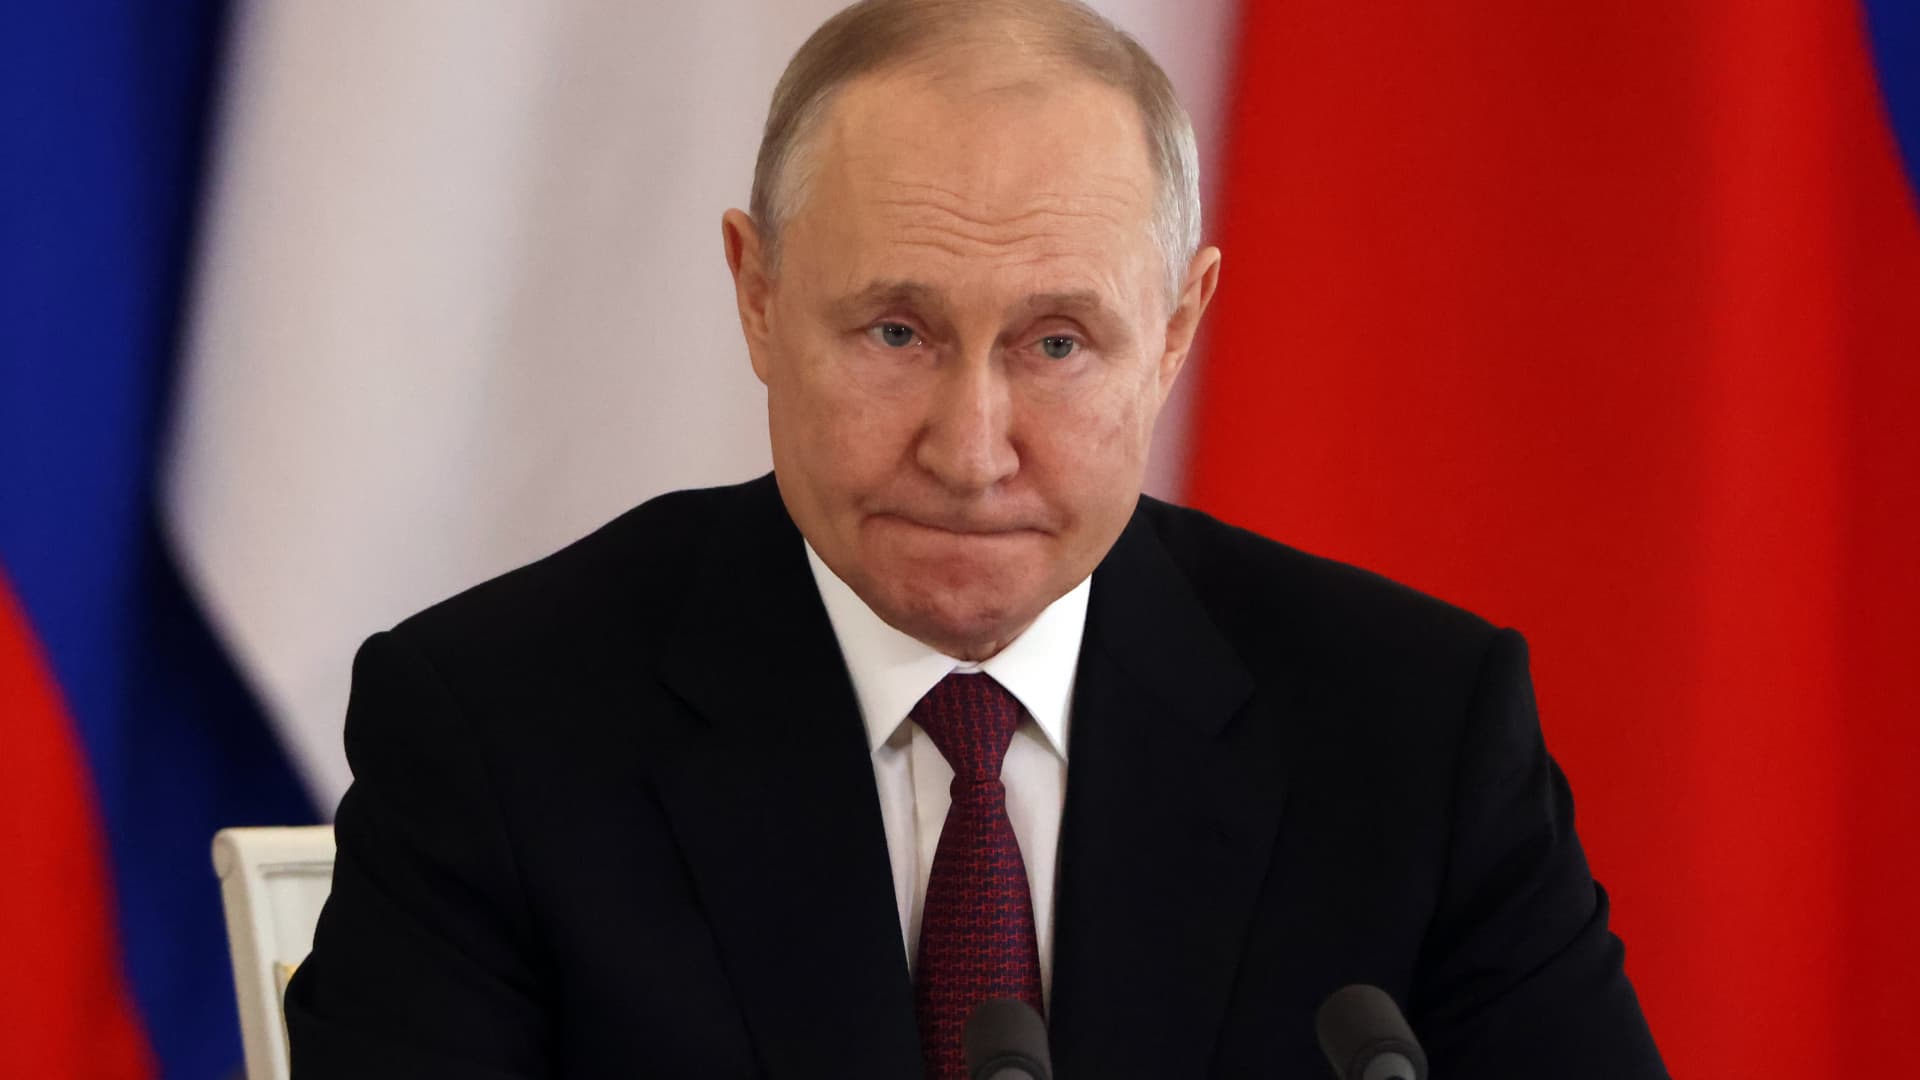 Putin condemns ‘criminal’ mutiny, says Russia would have crushed rebellion